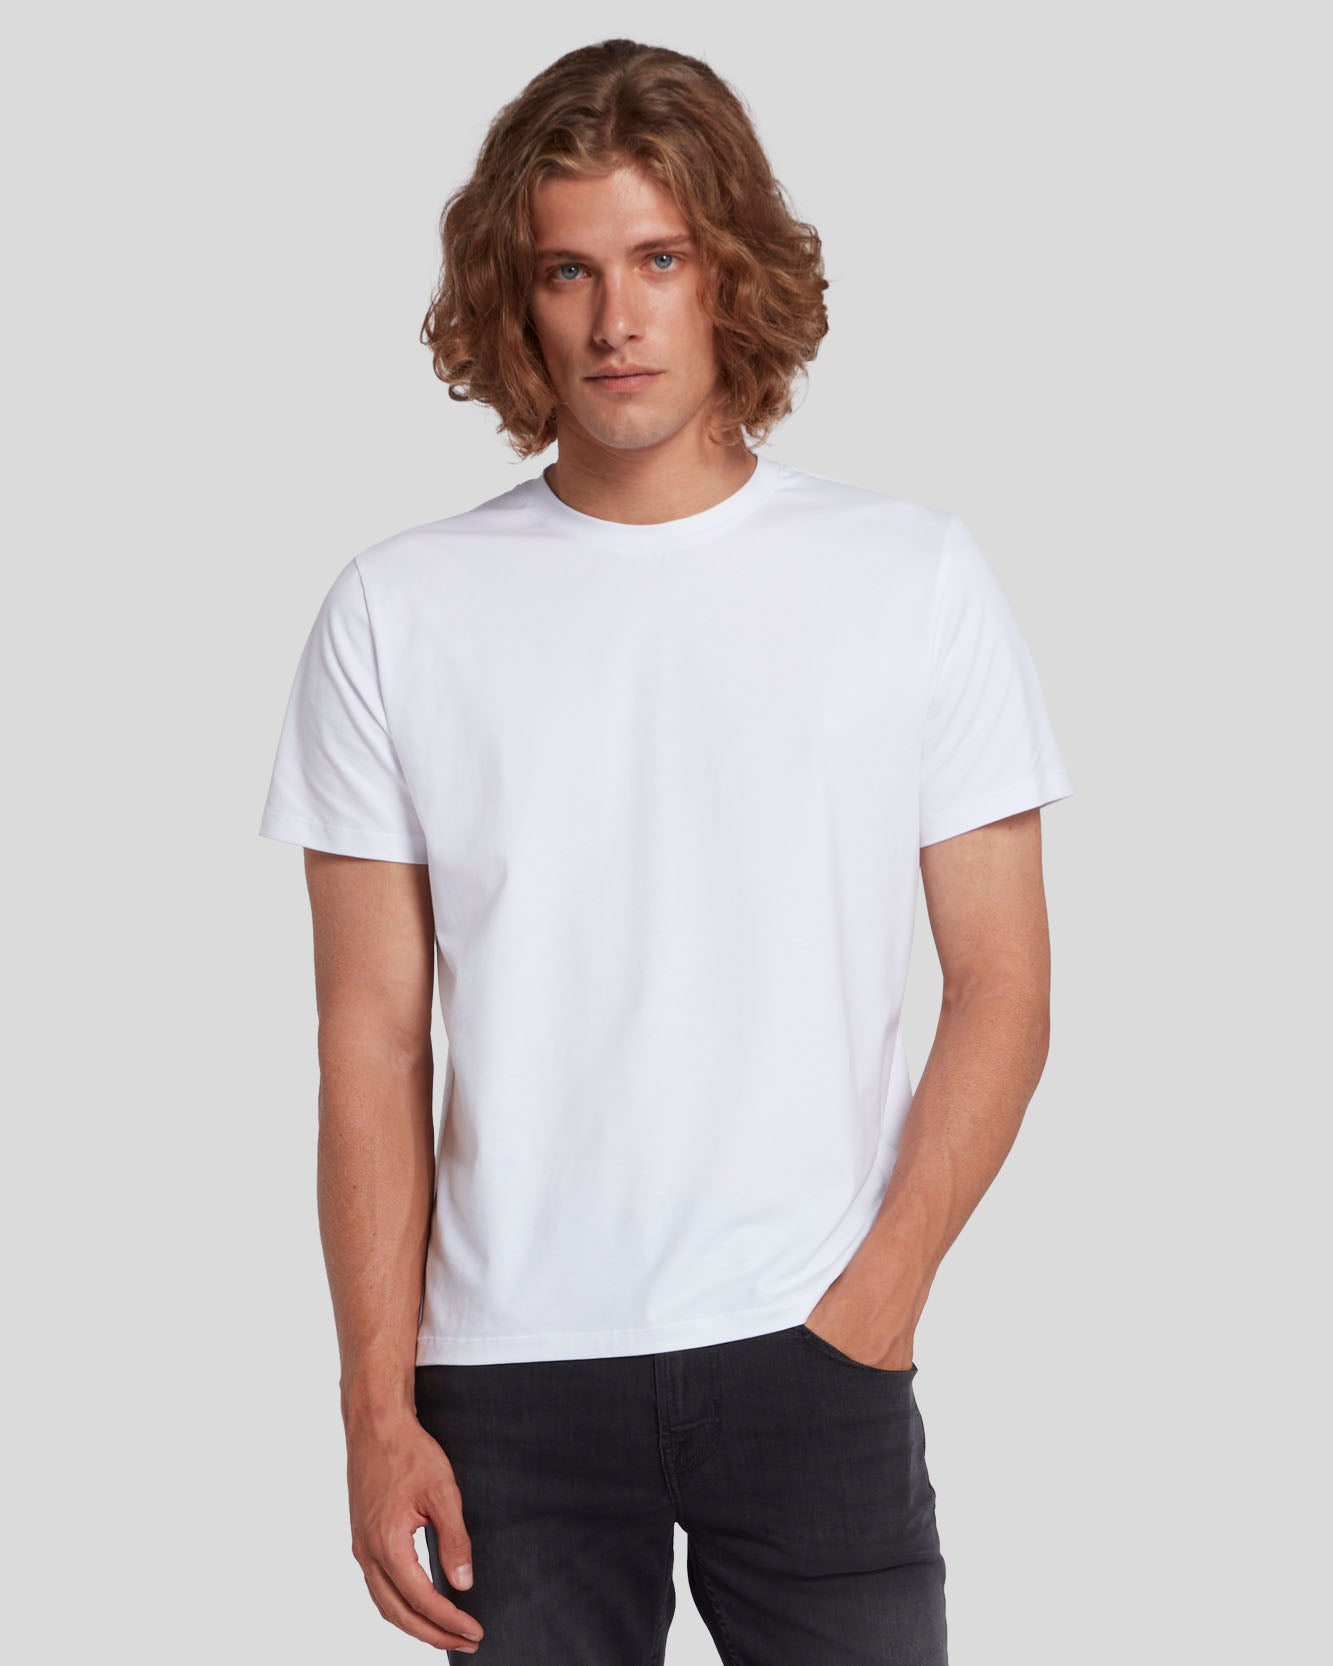 Luxe Performance Tee in White